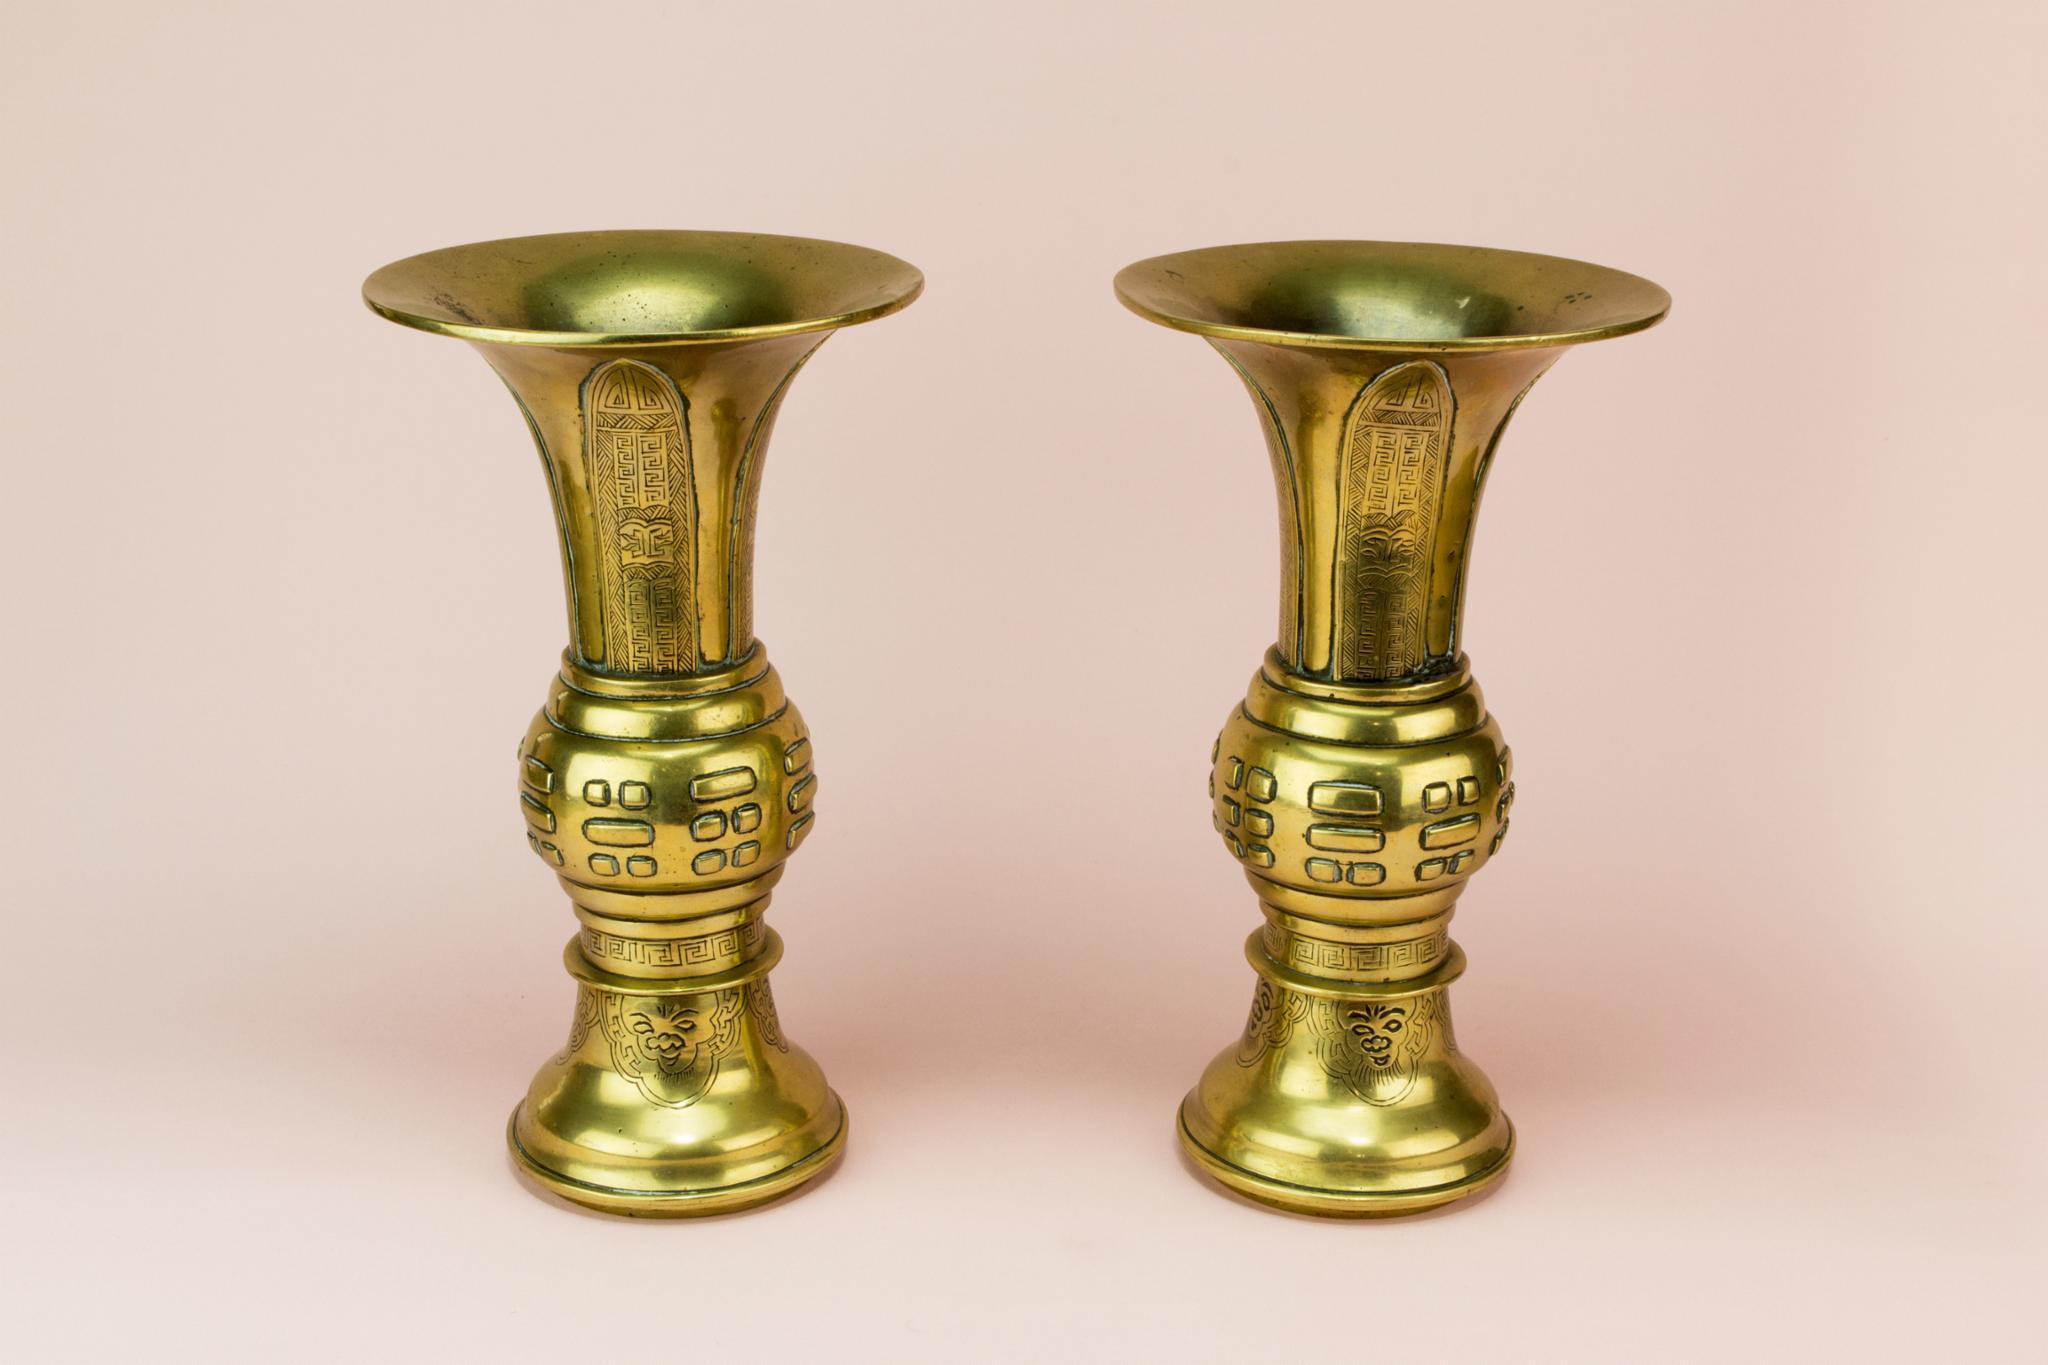 26 Great Antique Small Chinese Vases 2024 free download antique small chinese vases of 2 gu shaped brass vases chinese 19th century late 19th century within 2 gu shaped brass vases chinese 19th century